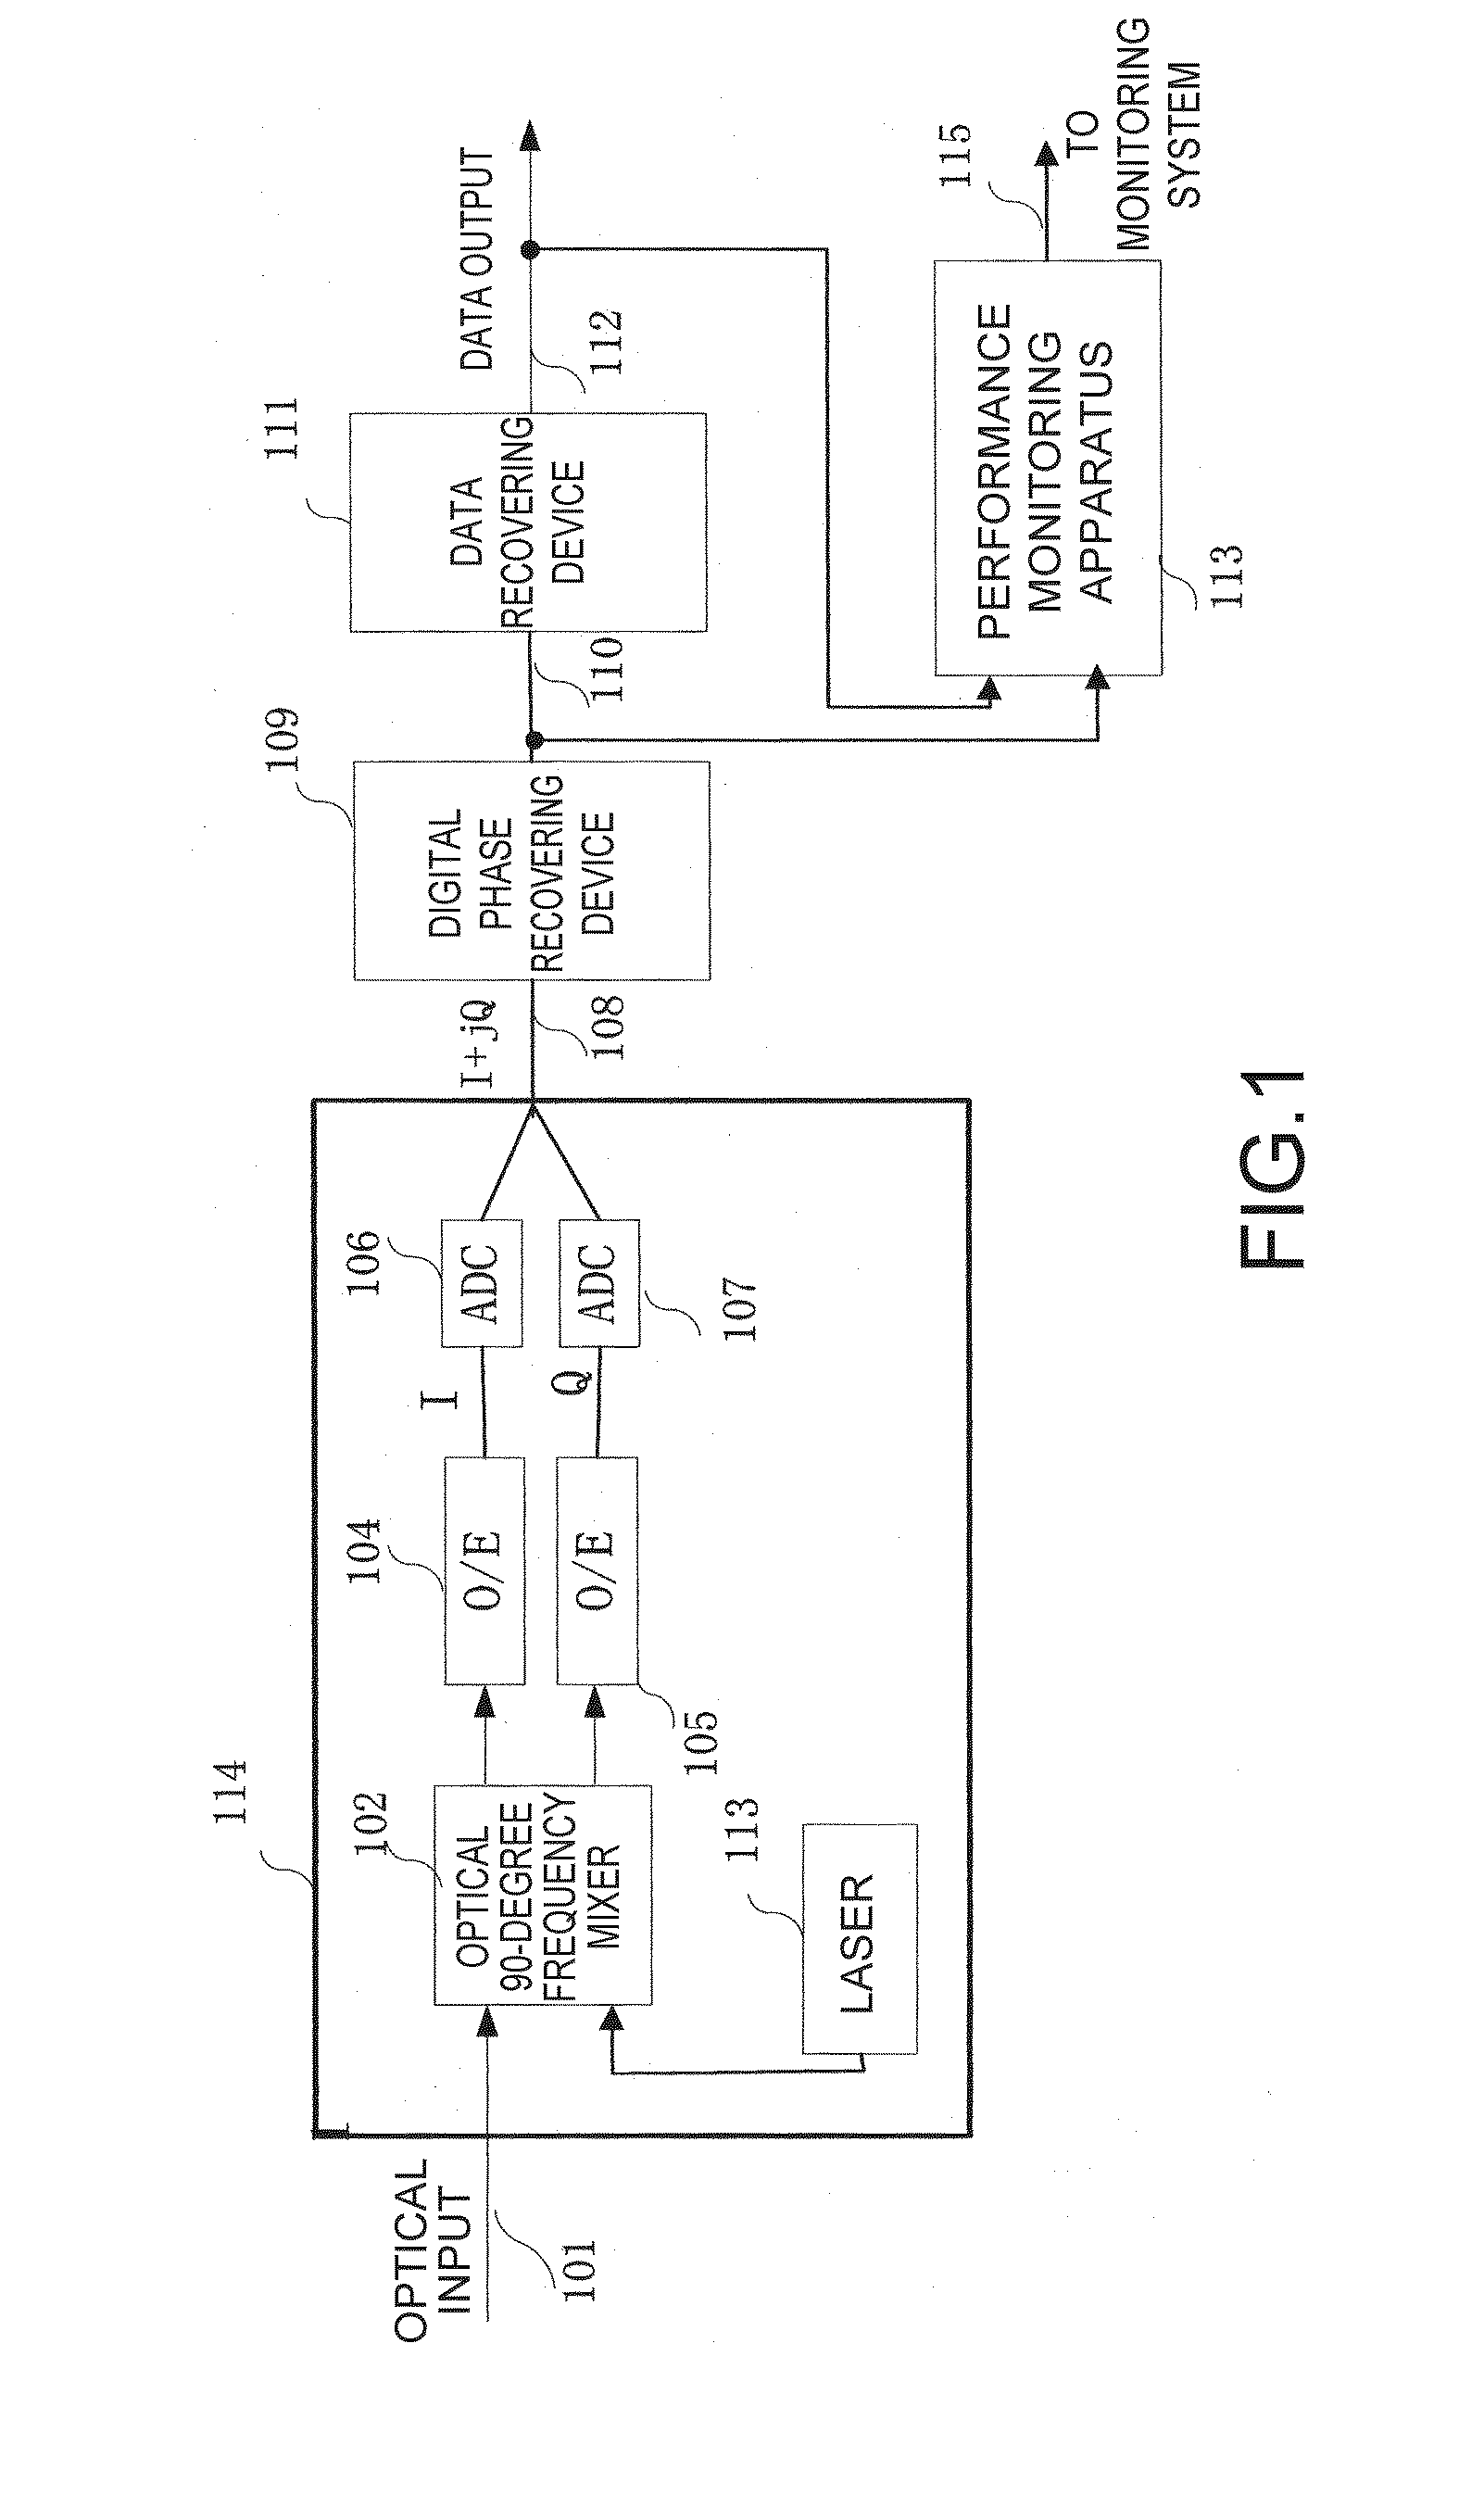 Optical coherent receiver, apparatus for and method of monitoring performance thereof